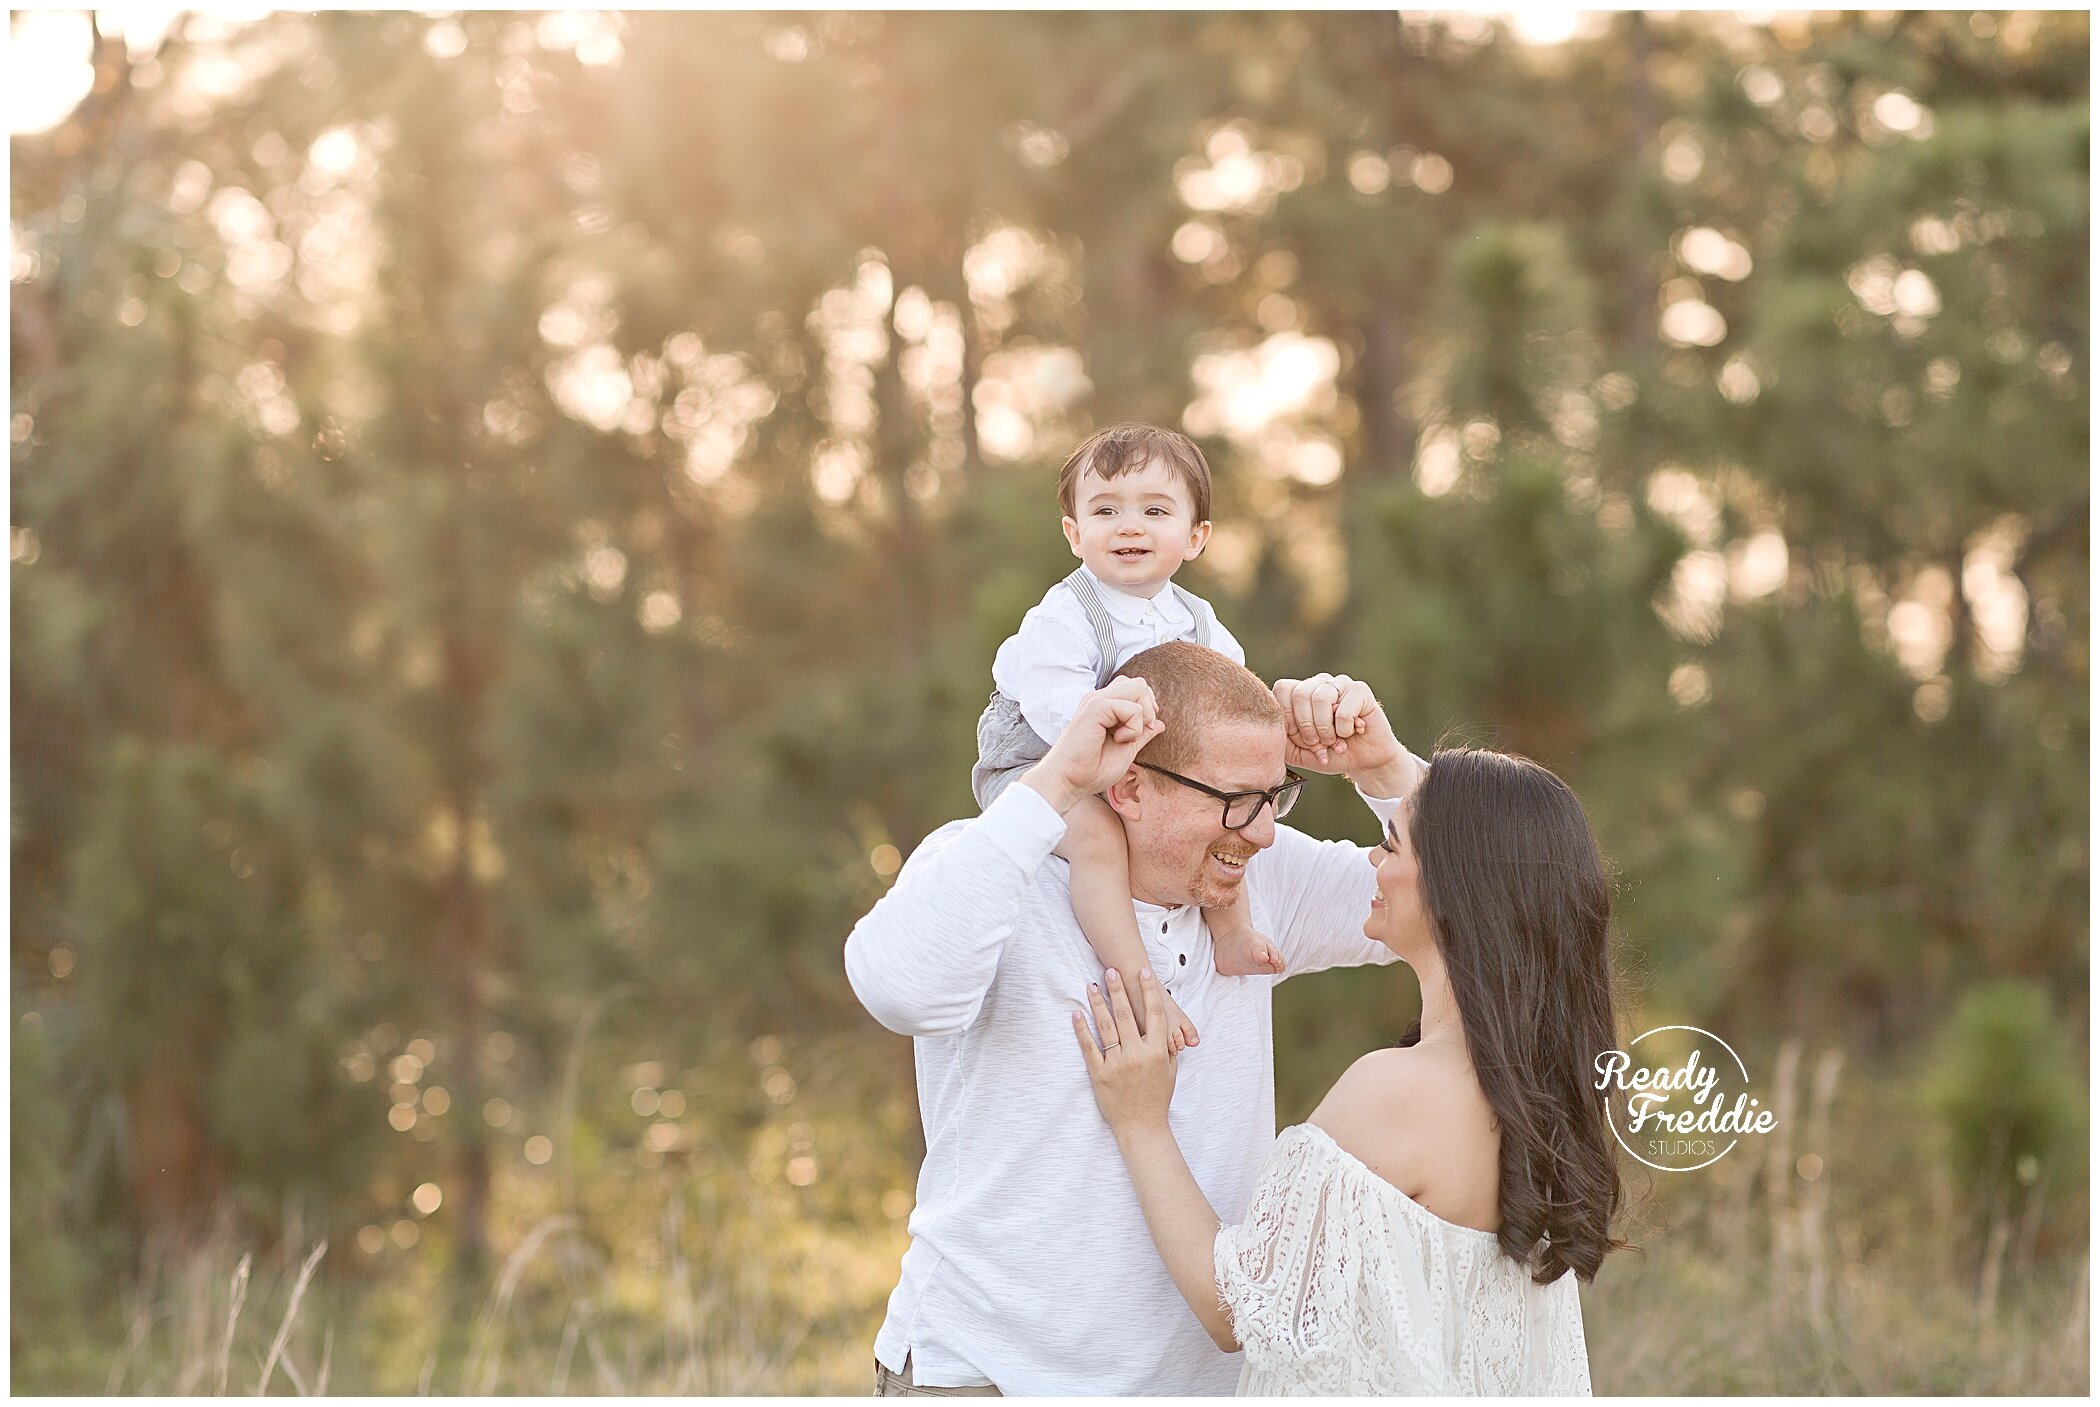 Best Family Photographers sunset session in Miami, FL with Ivanna Vidal Photography